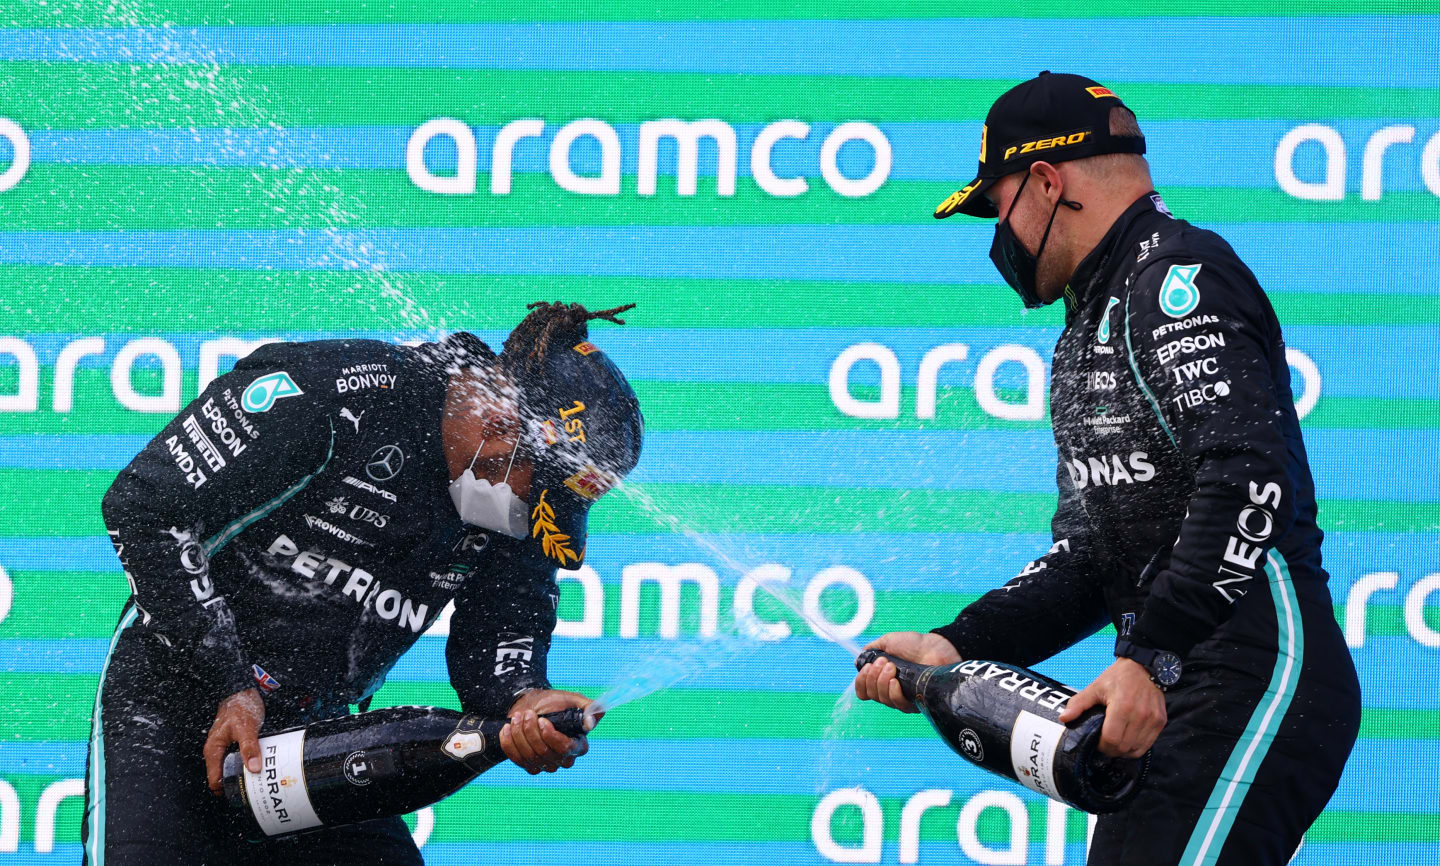 BARCELONA, SPAIN - MAY 09: Race winner Lewis Hamilton of Great Britain and Mercedes GP and third